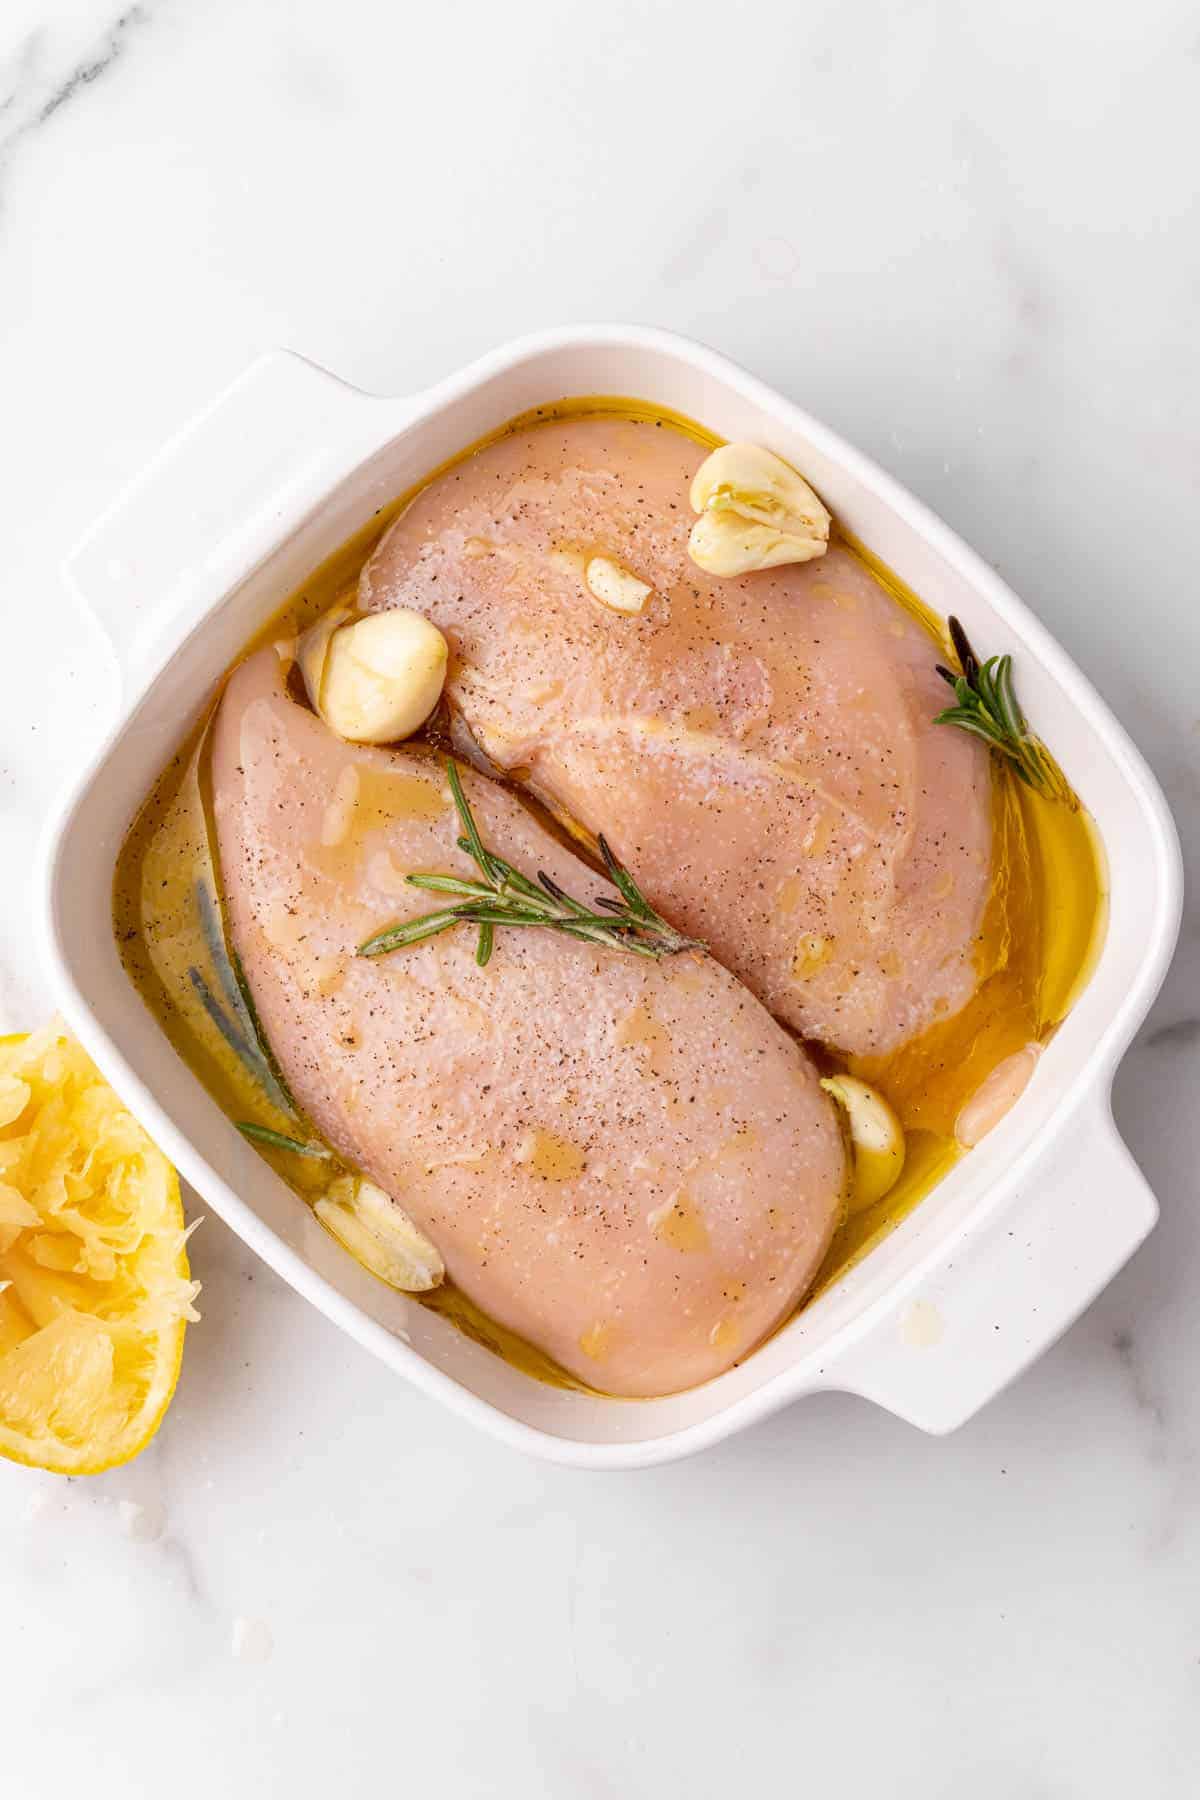 Garlic, rosemary, seasoning, and lemon added to the raw chicken breasts in a white baking dish, as seen from above